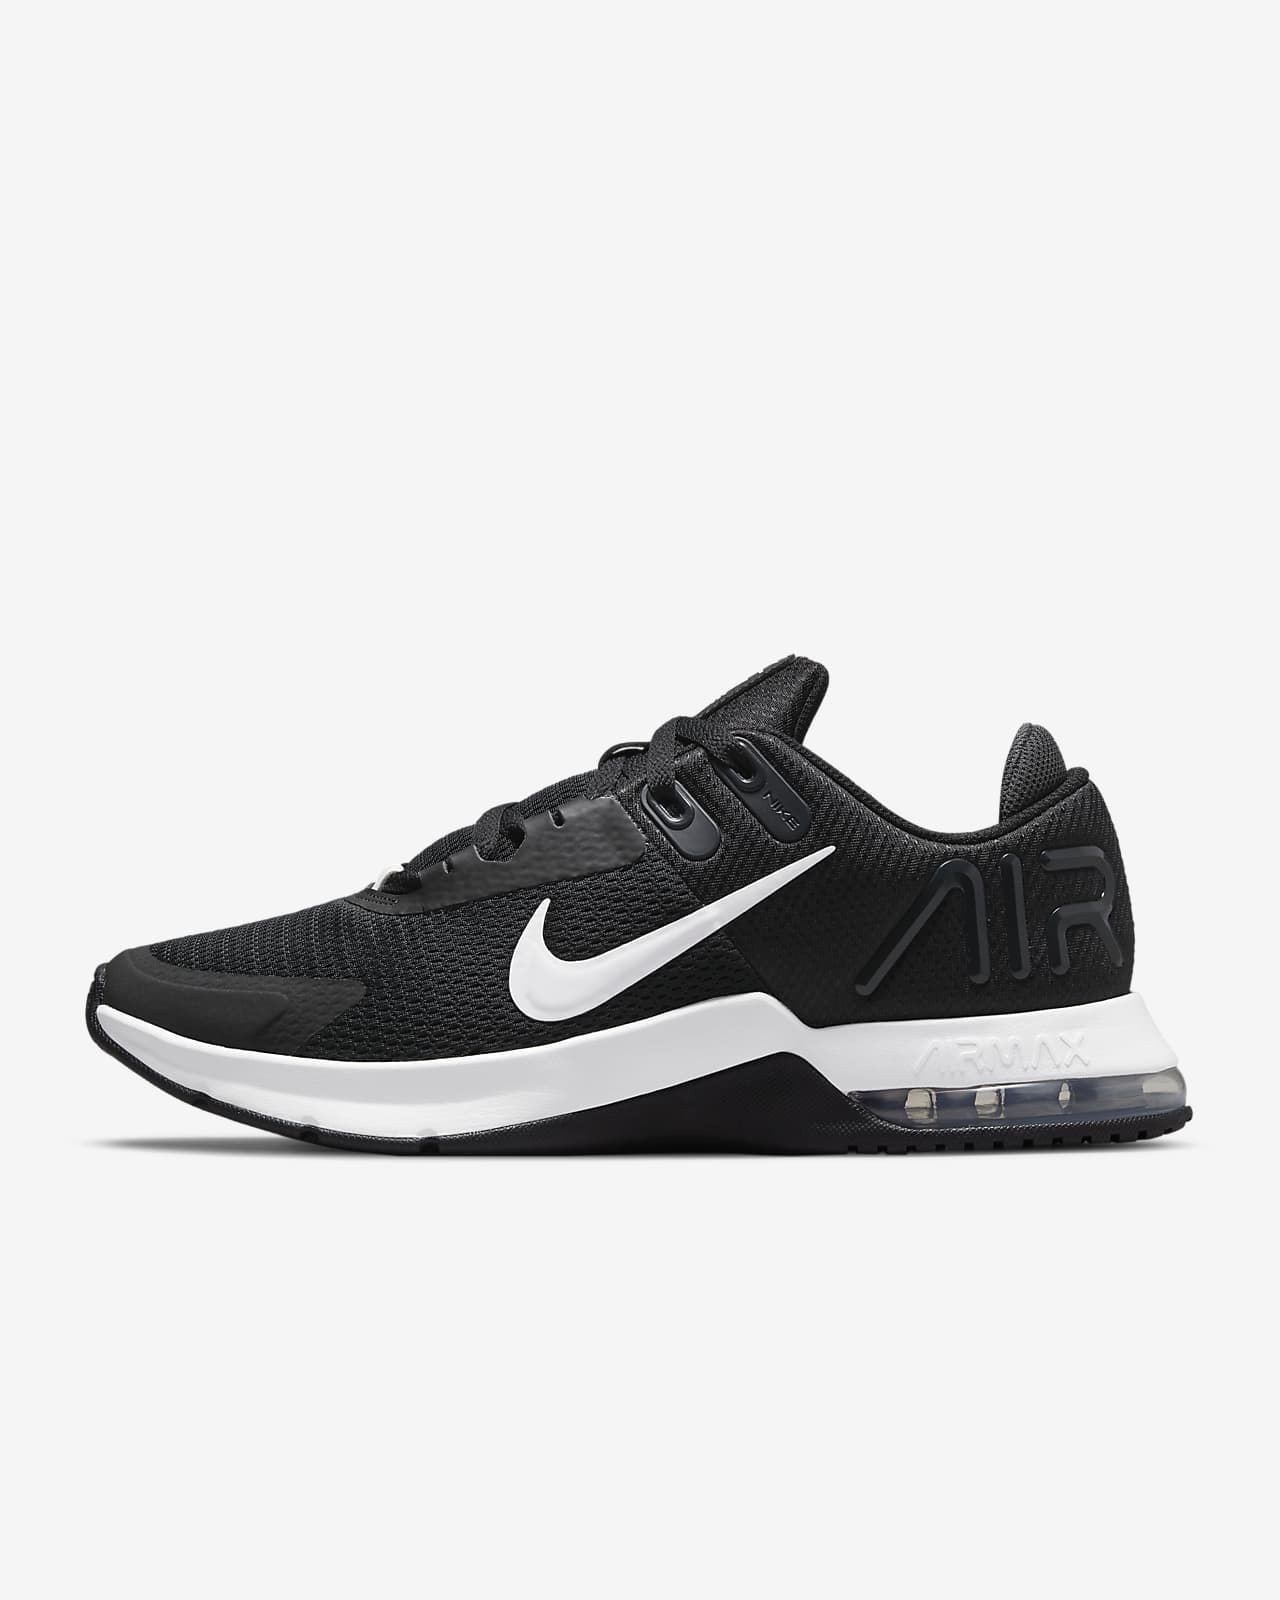 Nike Air Max Alpha Trainer 4 Men's Workout Shoes